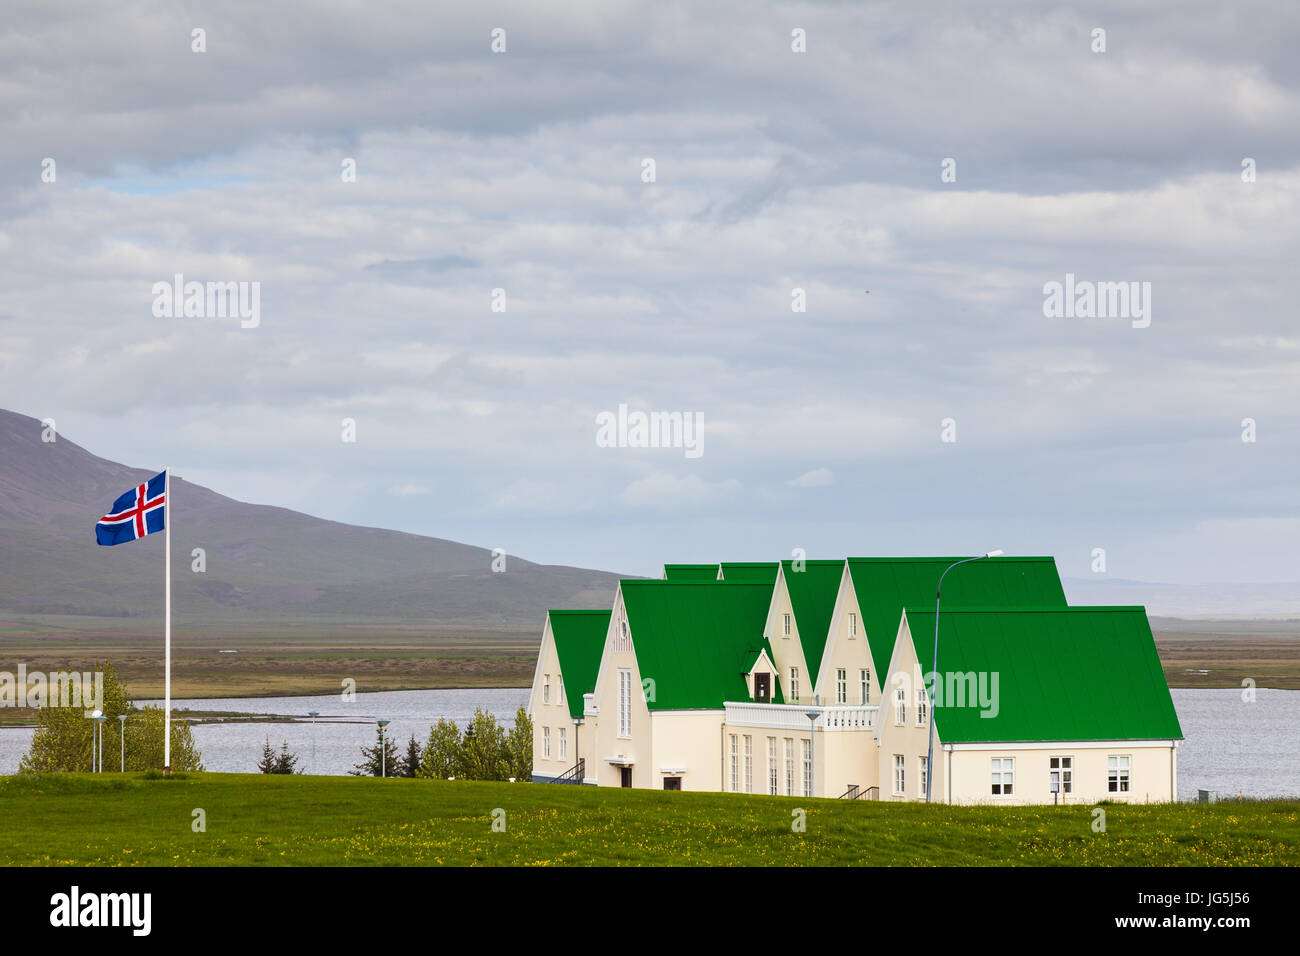 Lodge on the edge of Laugarvatn lake on Highway 37 in Iceland Stock Photo